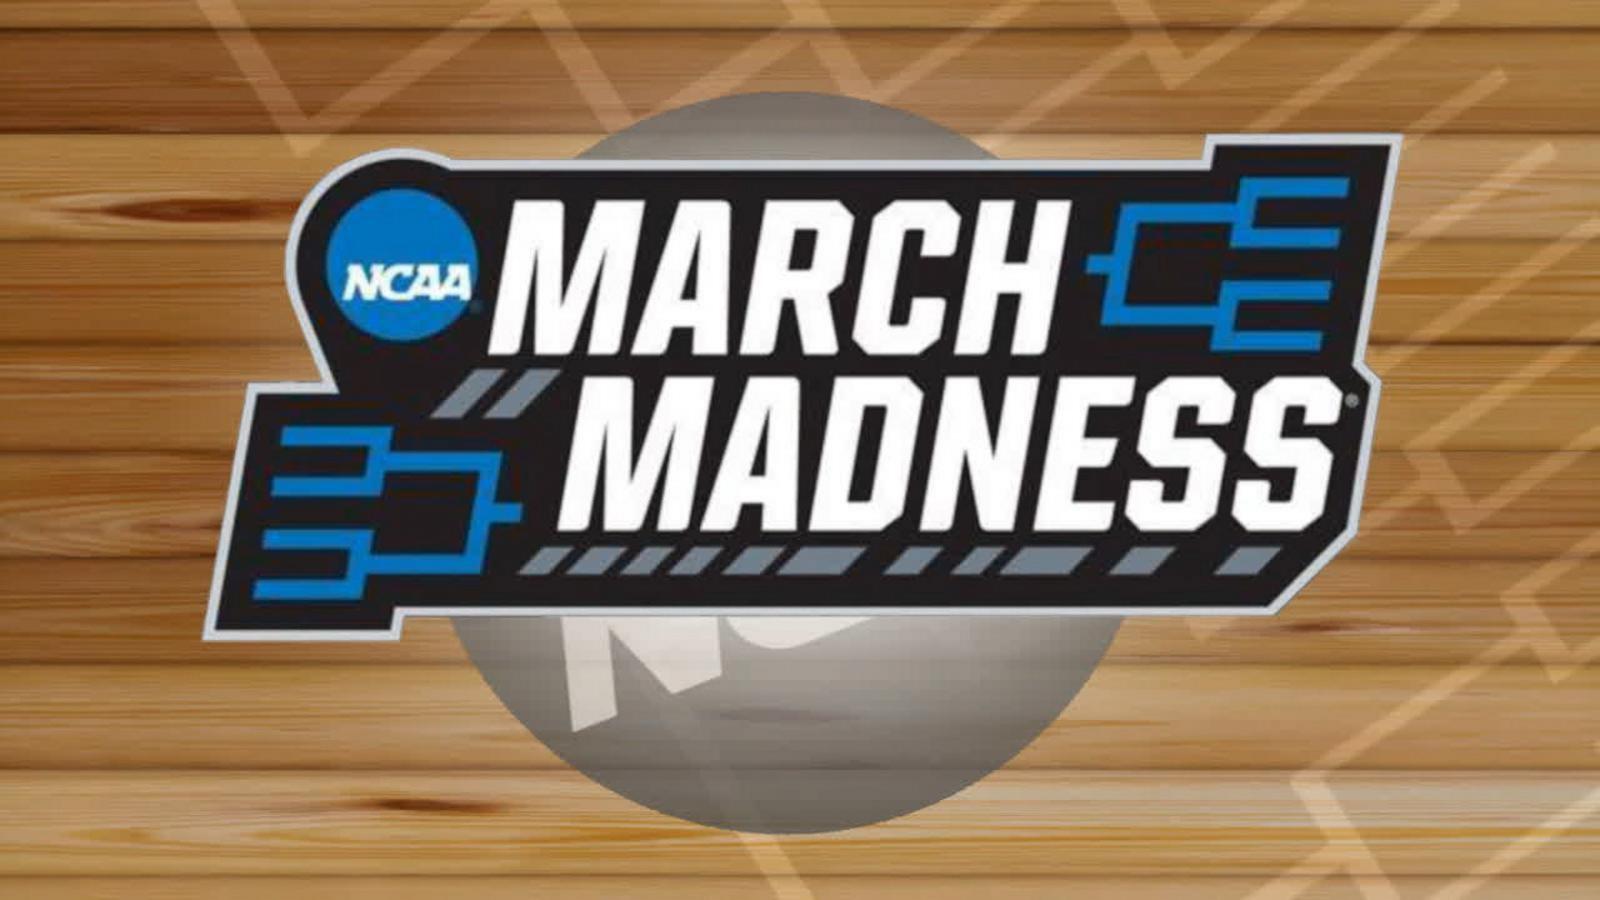 VIDEO: What to know about ‘First Four’ games in March Madness